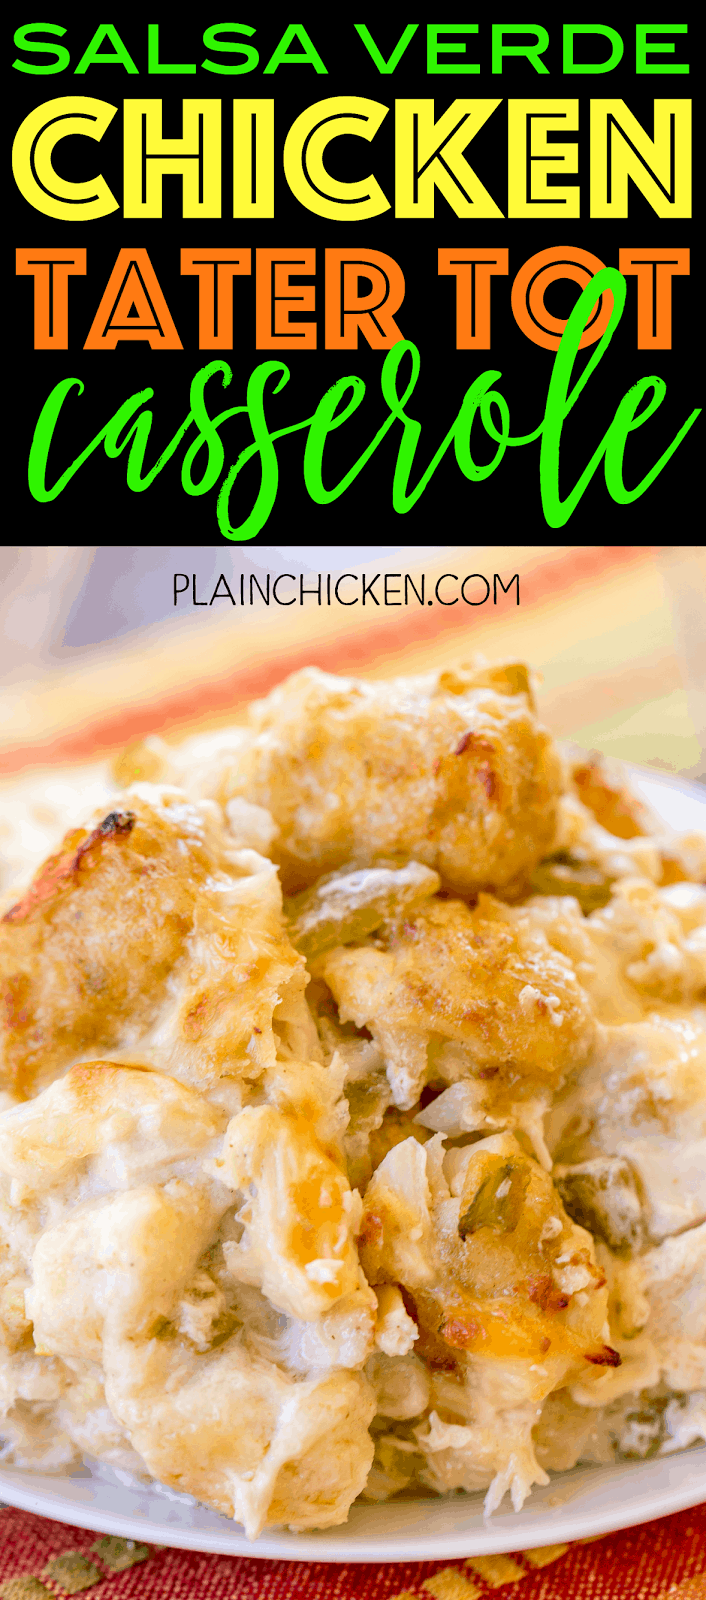 Salsa Verde Chicken Tater Tot Casserole - ridiculously good! Everyone LOVES this easy Mexican casserole!! Chicken, green chiles, sour cream, chicken broth, cumin, flour and butter. No cream of anything soup! We make this at least once a month! SO good!!